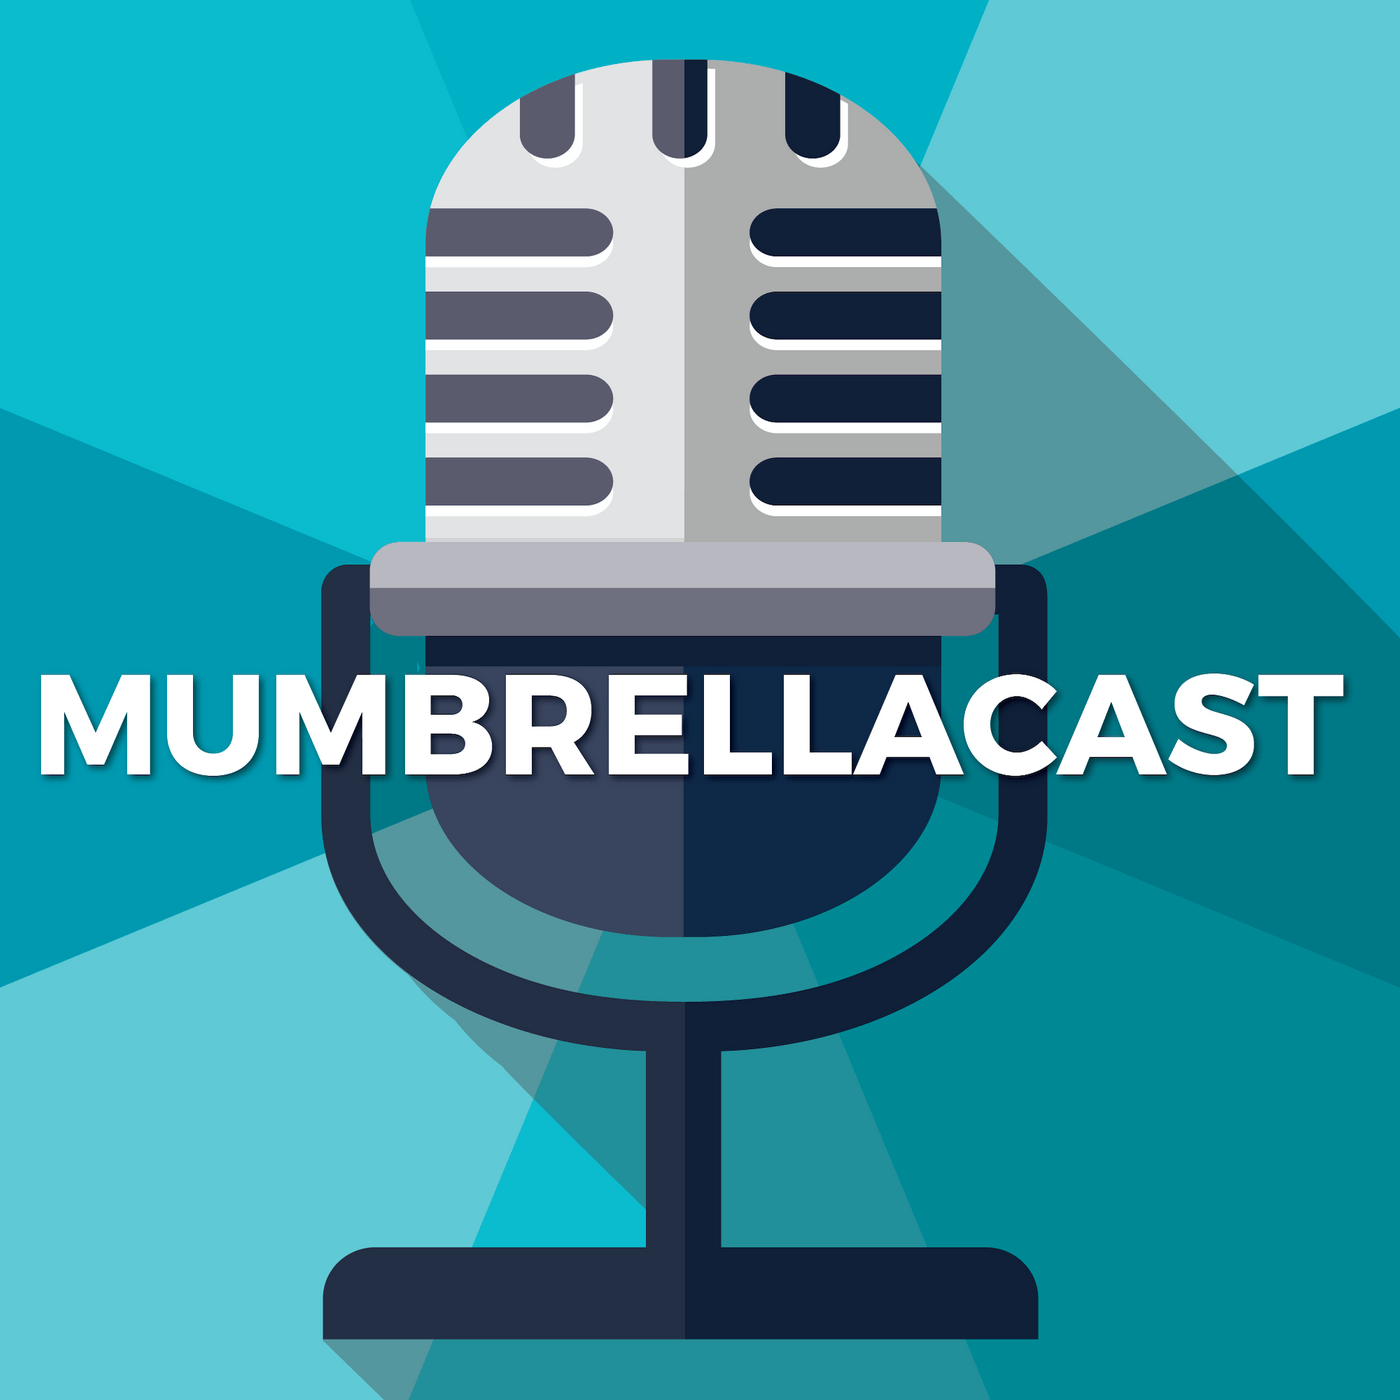 Mumbrellacast: Do Adland Recruiters Have A Woman Problem? Plus The BVOD Dilemma, And Ladbible In Oz